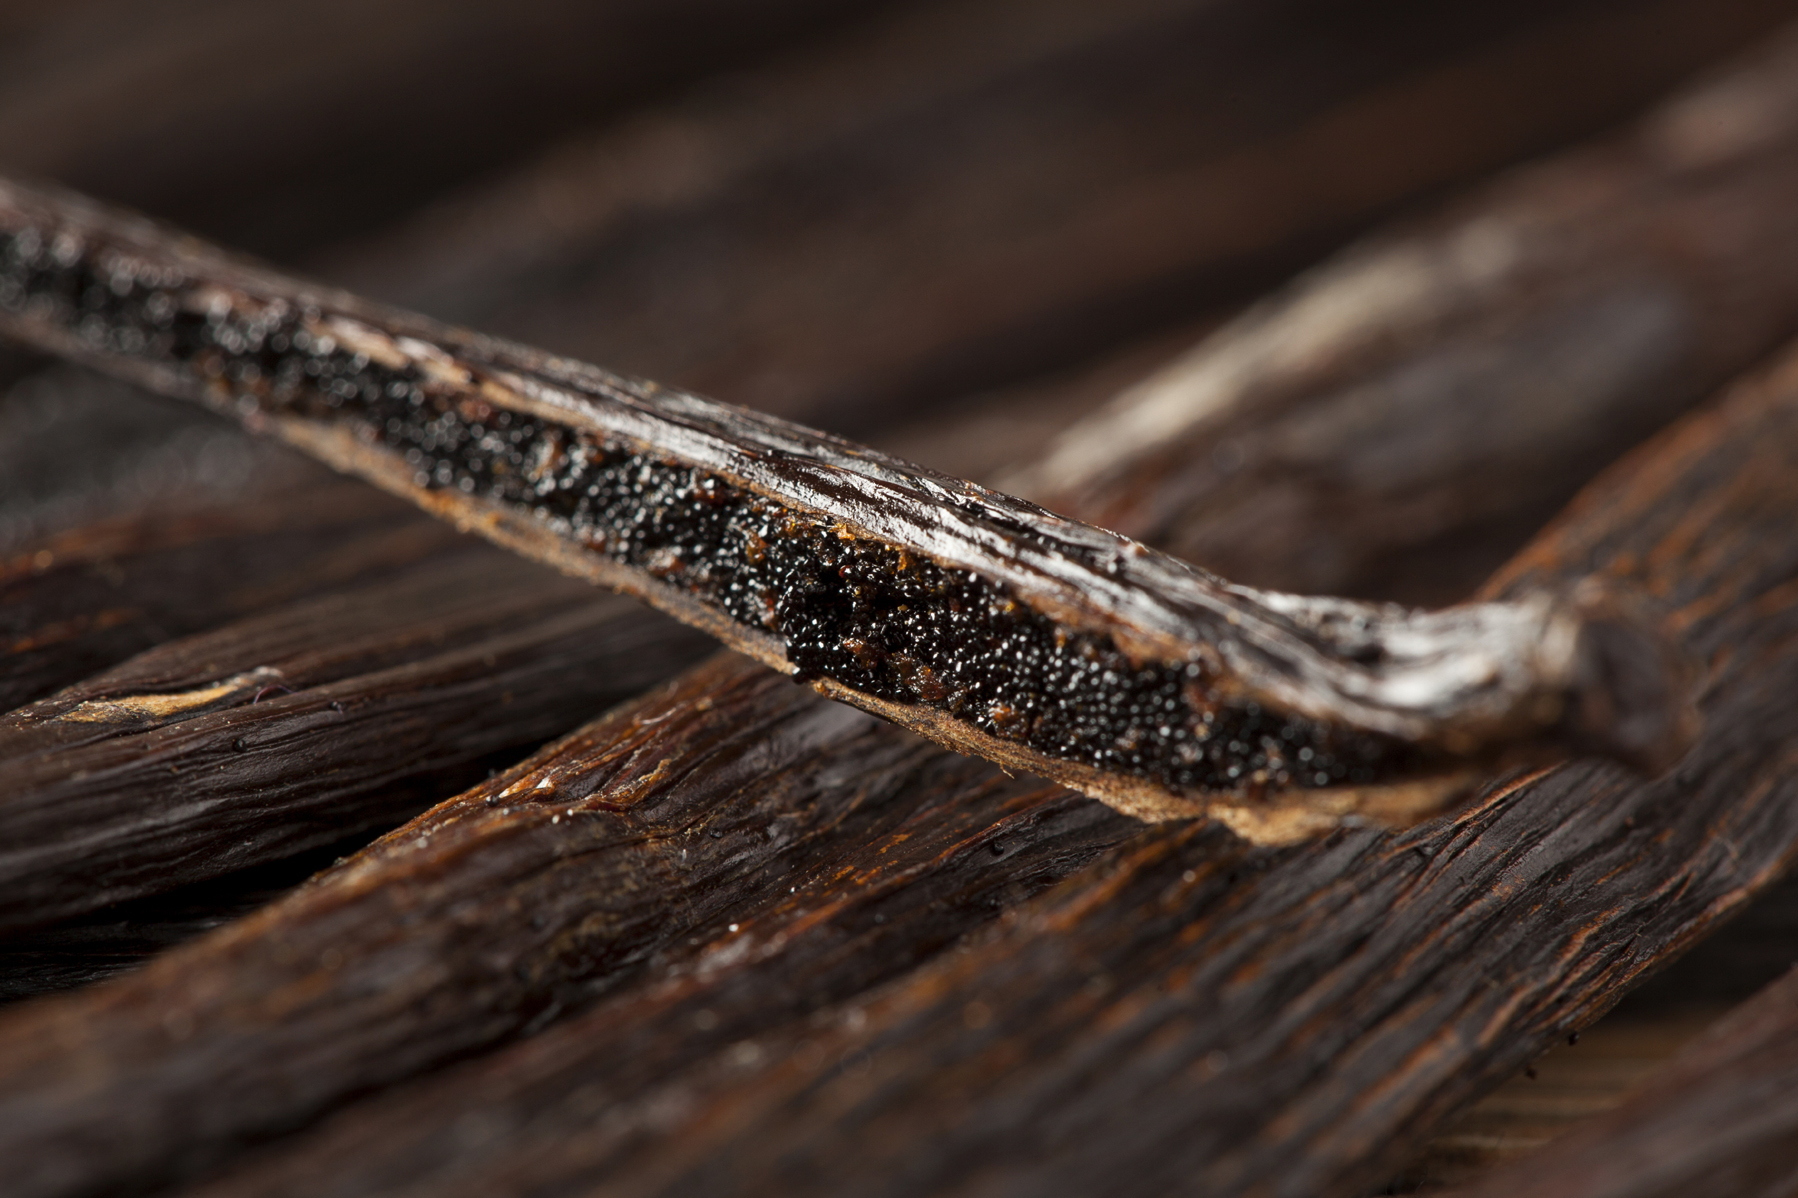 The vanilla bean, along with cacao, originated in the Americas and is now cultivated in several countries around the world. Here, the seeds inside the pod are shown. Photo: Brent Hofacker/iStockphoto